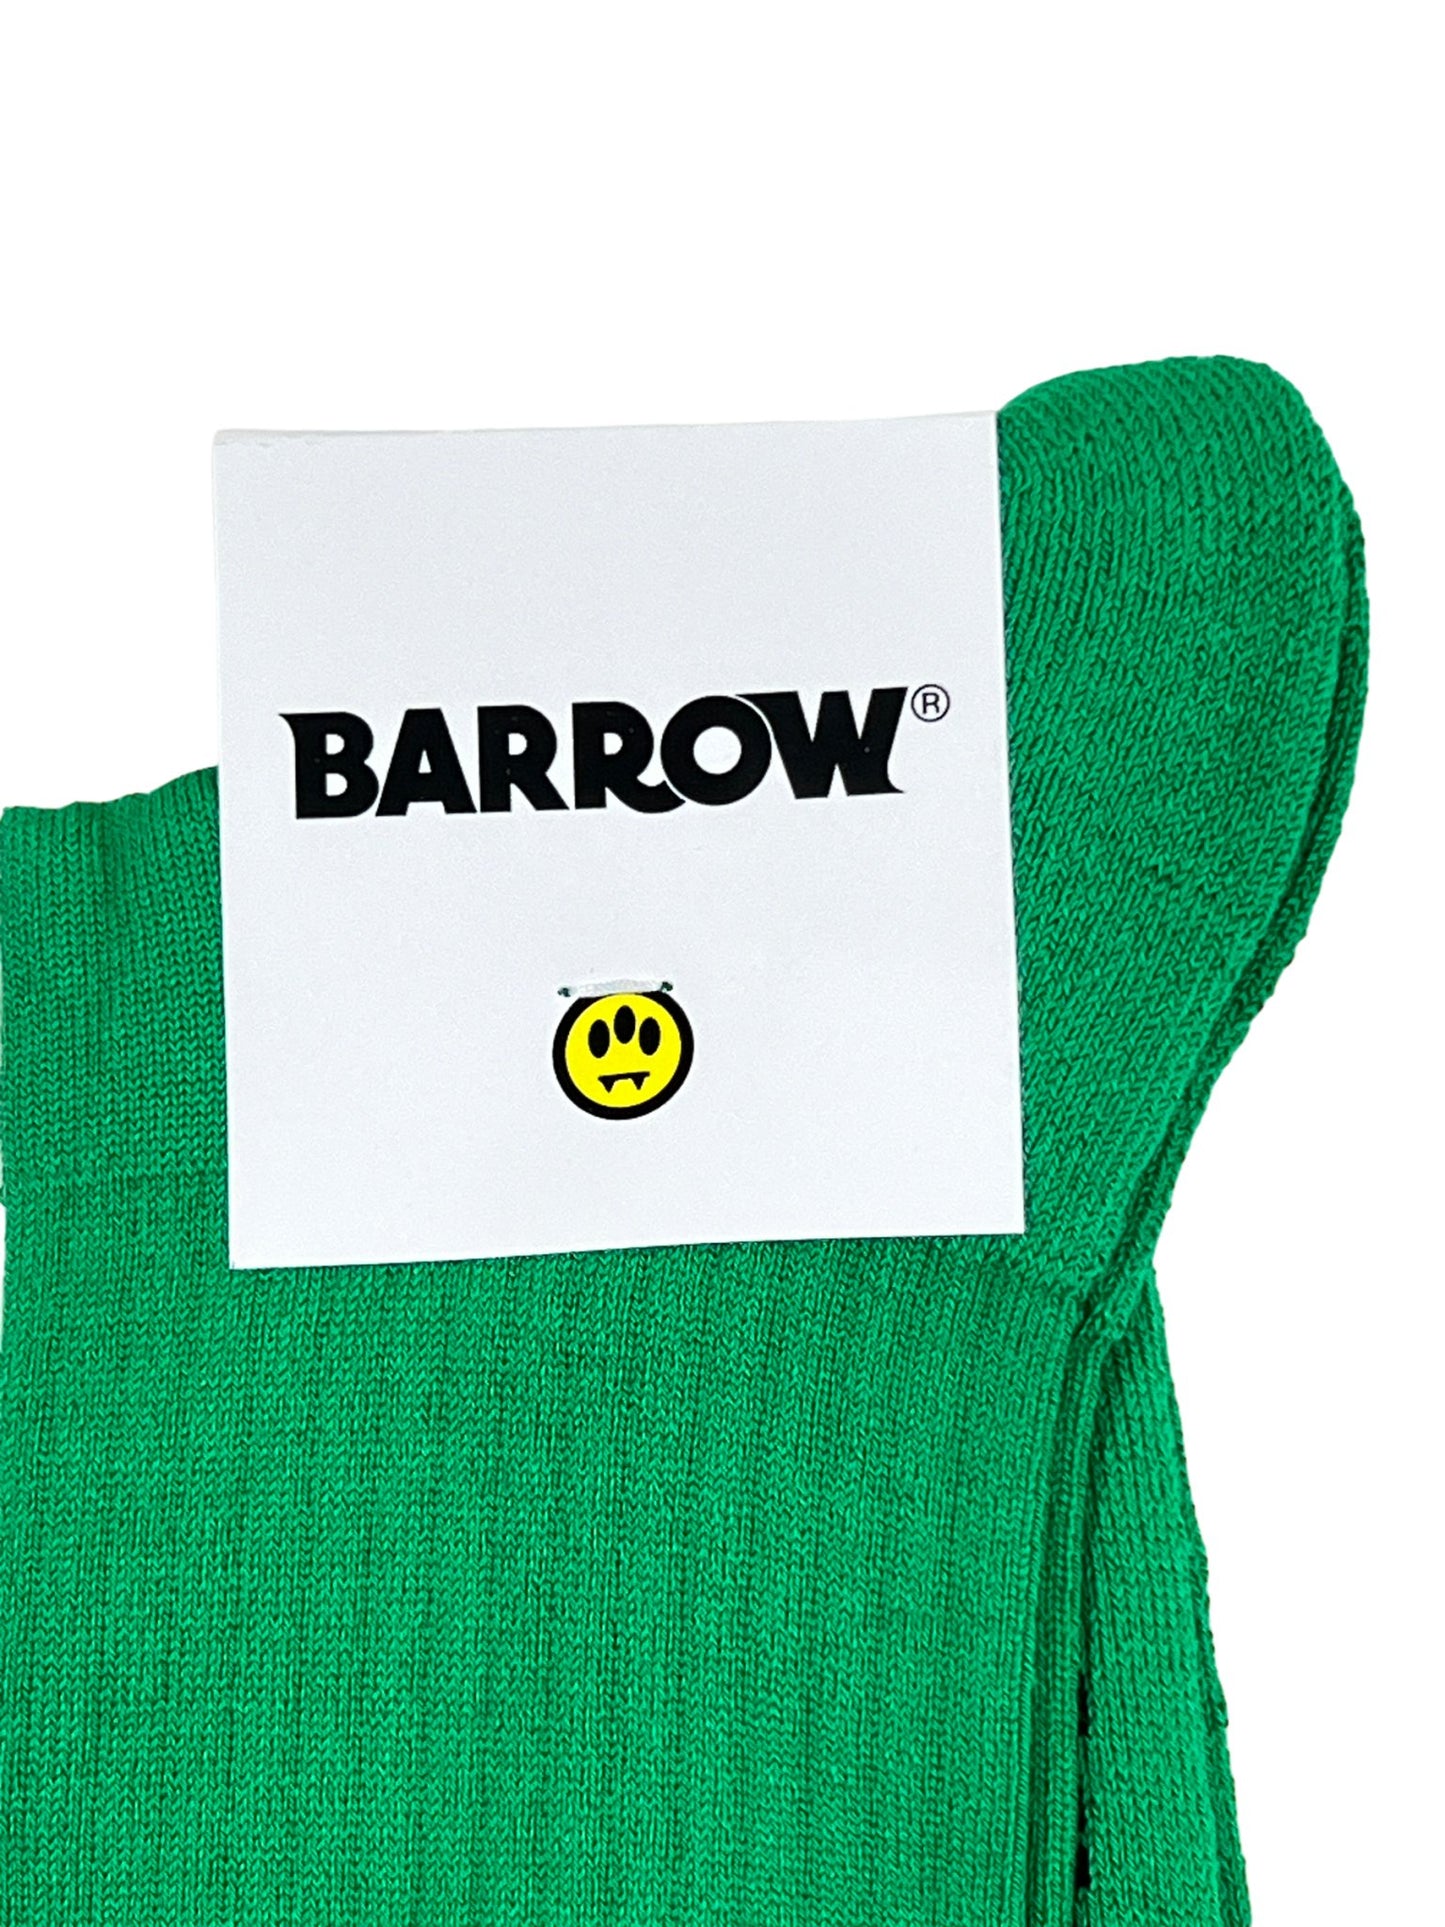 A green knit sweater made in Italy with a white label featuring the text "BARROW" and a yellow smiley face logo.